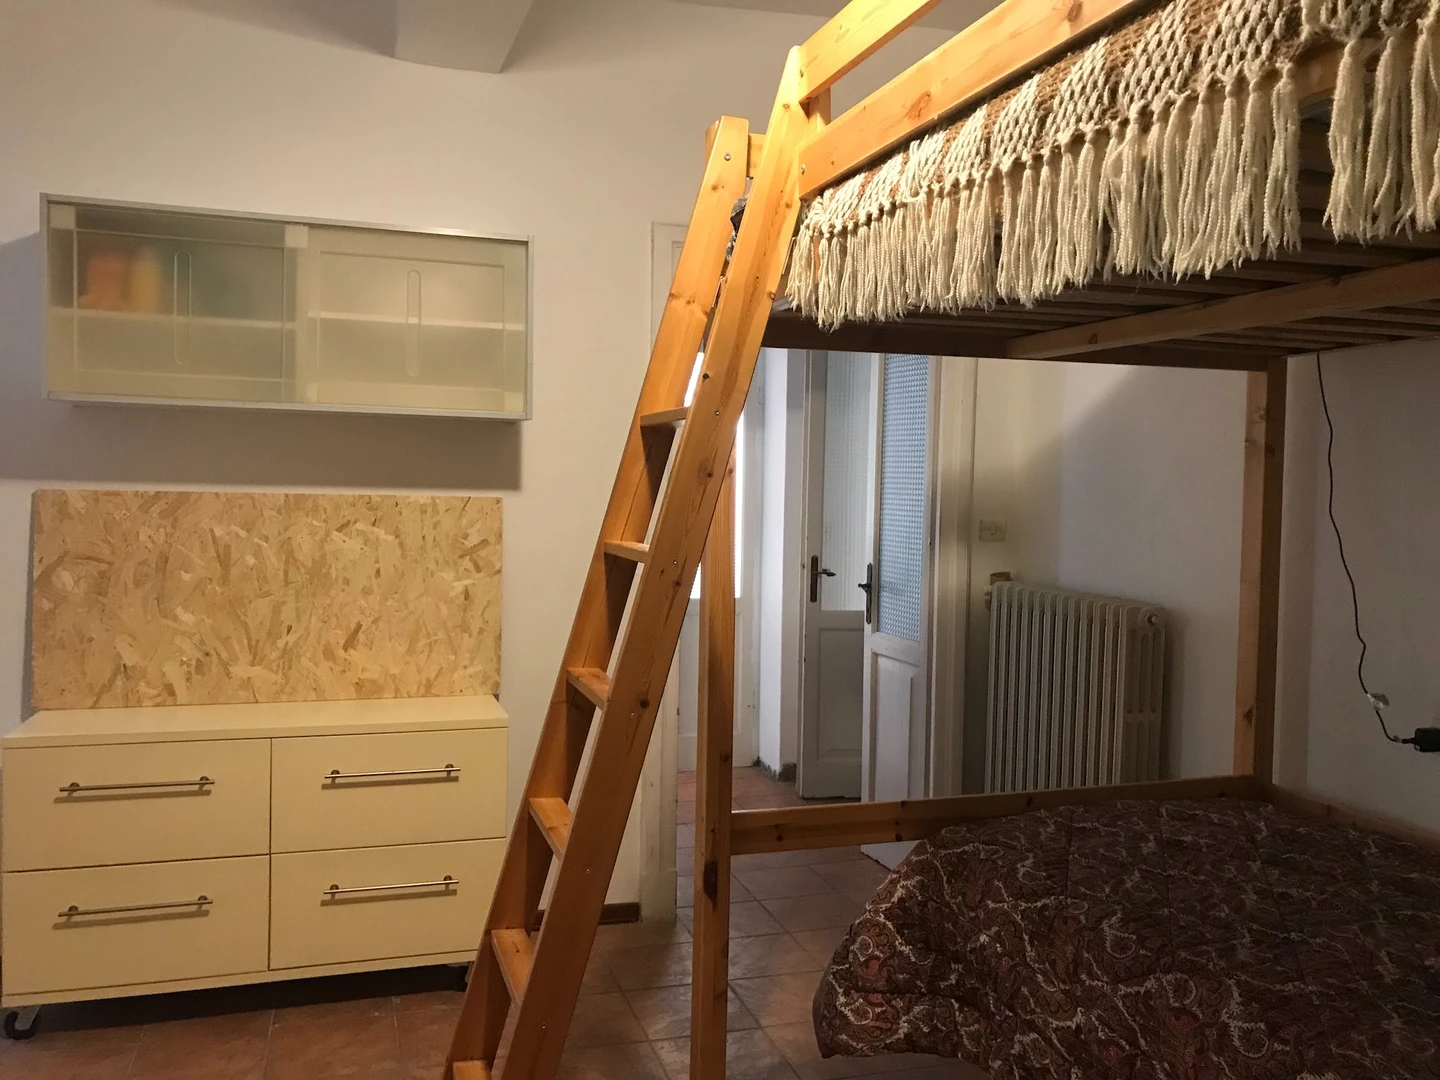 Room for rent with double bed Parma